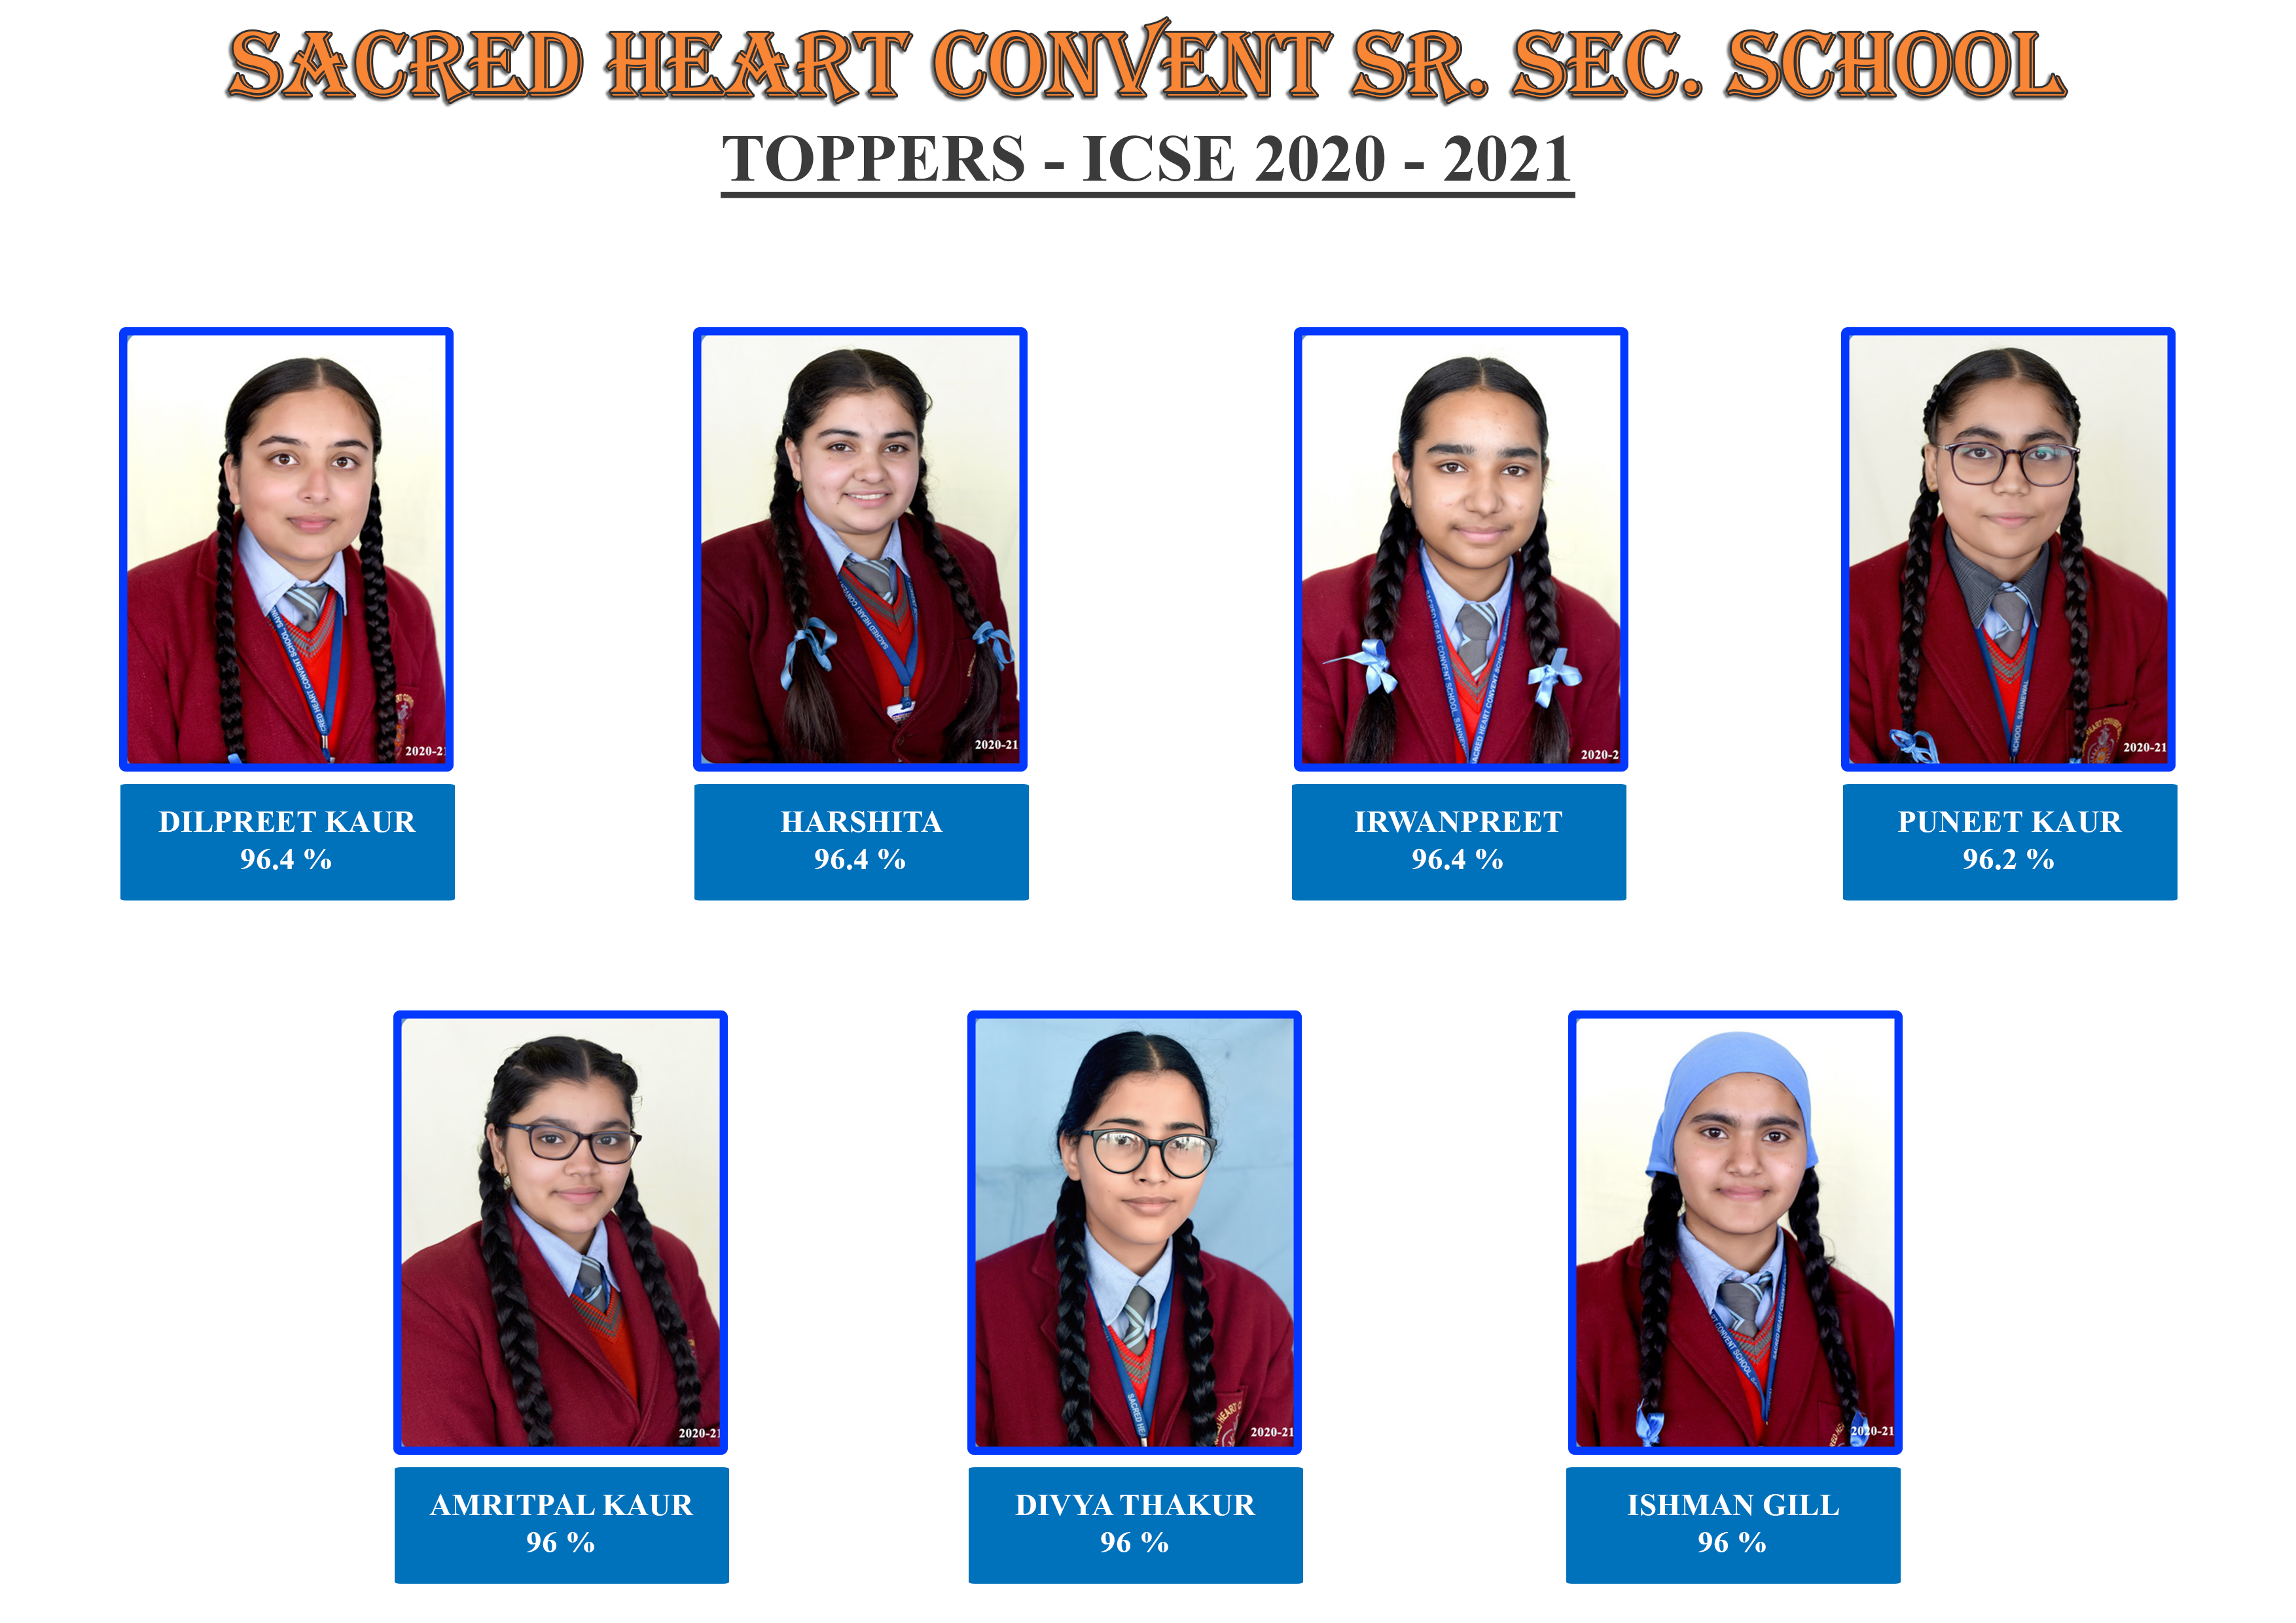 ICSE Toppers 2020-2021